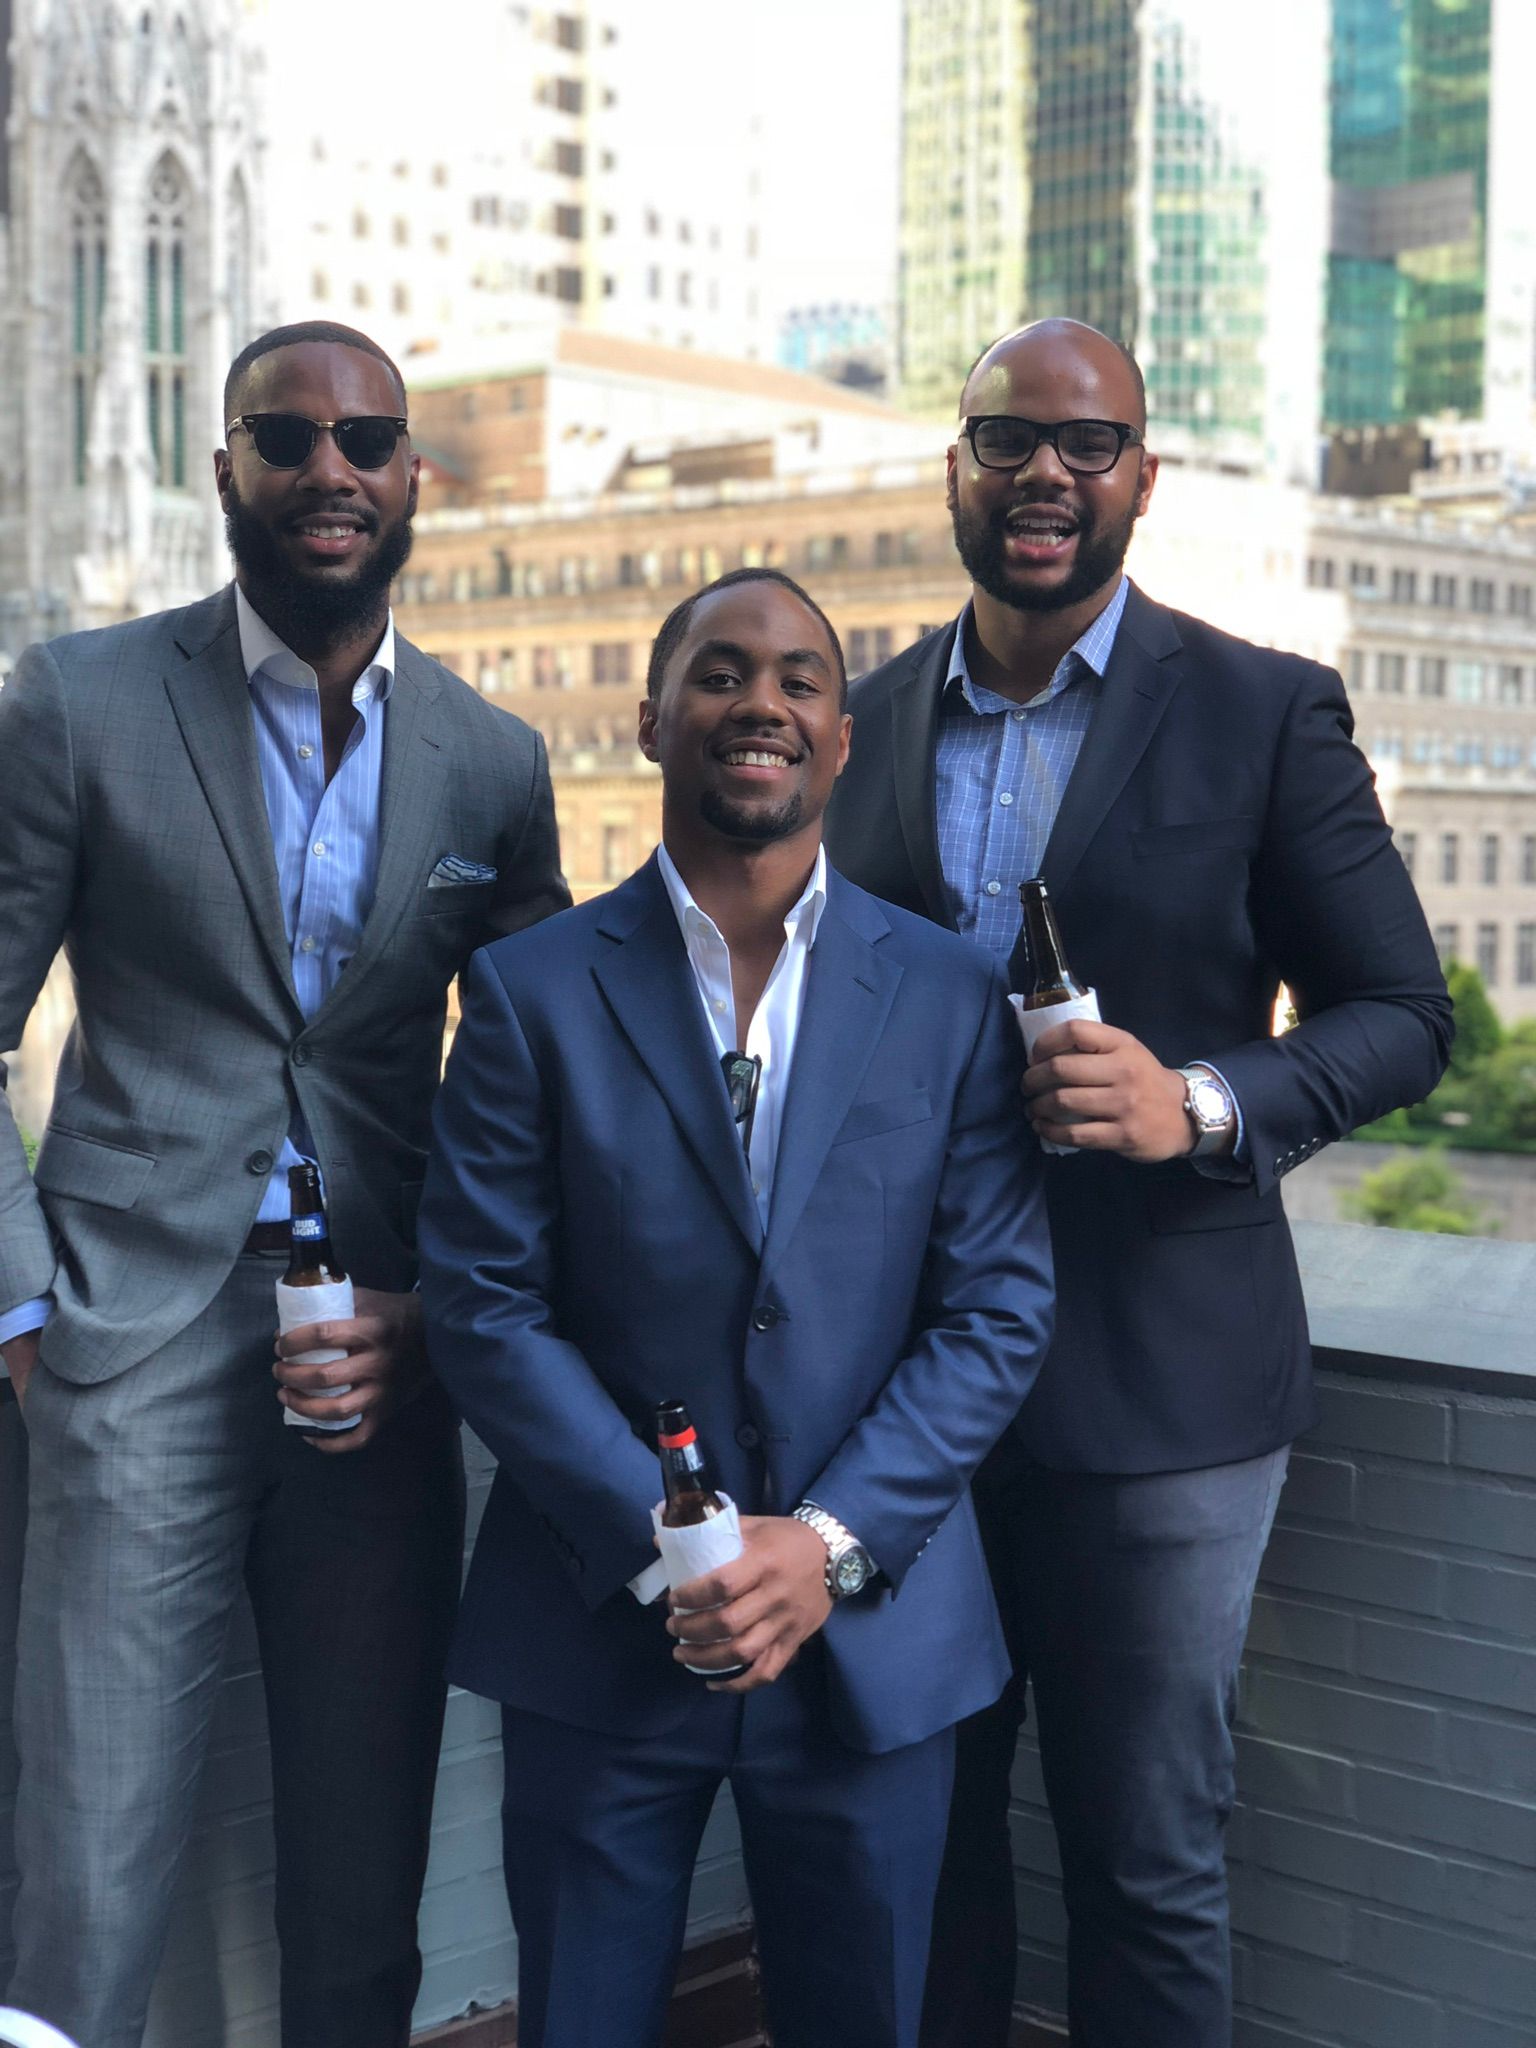 Brothas in suits because why not? Midtown Manhattan, NYC. Commercial real estate account managers.